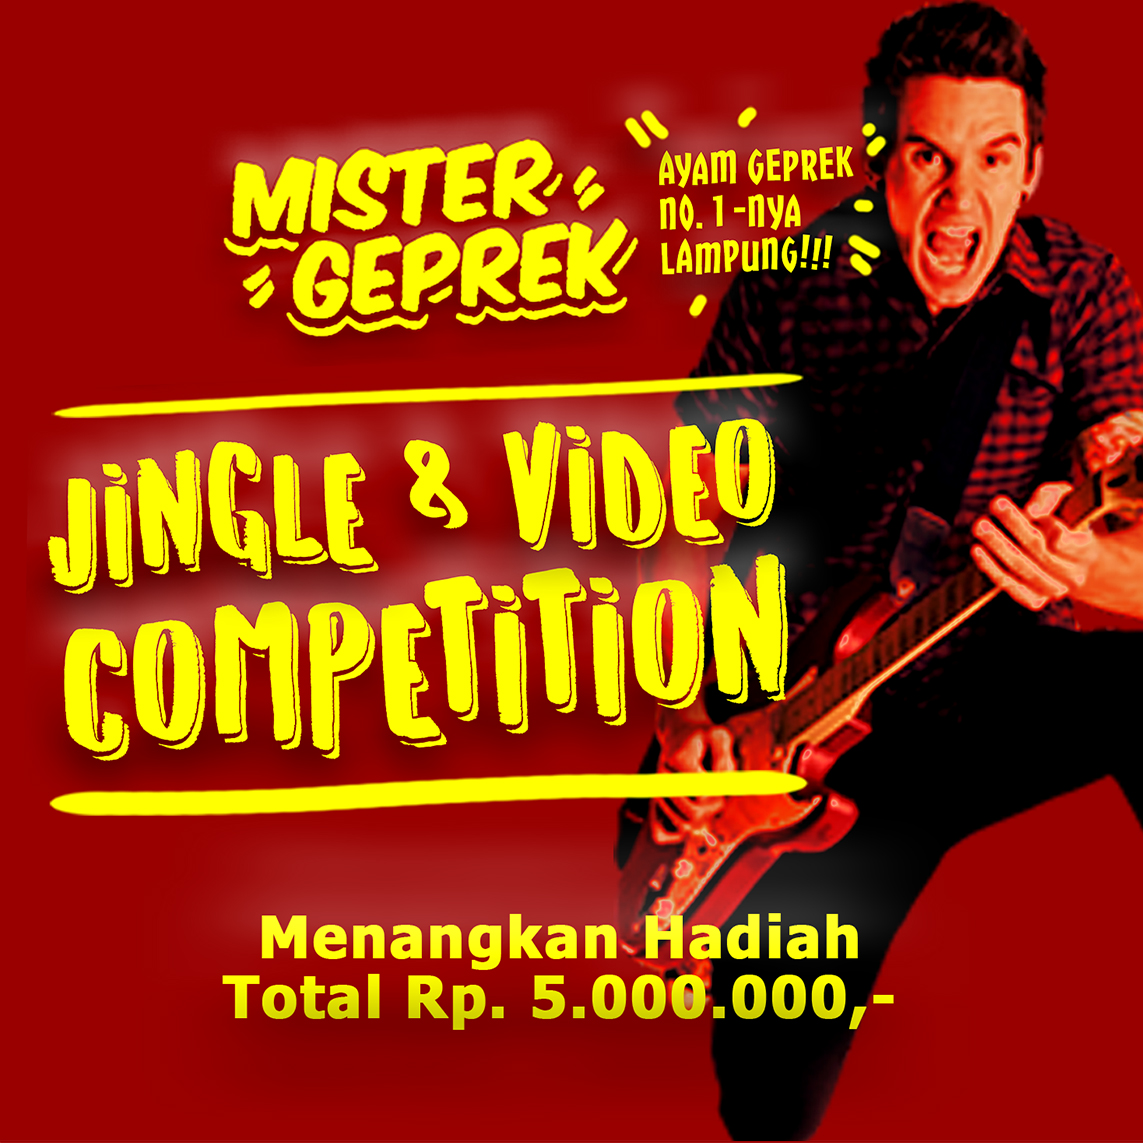 Jingle &#038; Video Clip Competition Mister Geprek 2017, Hello Kepsir